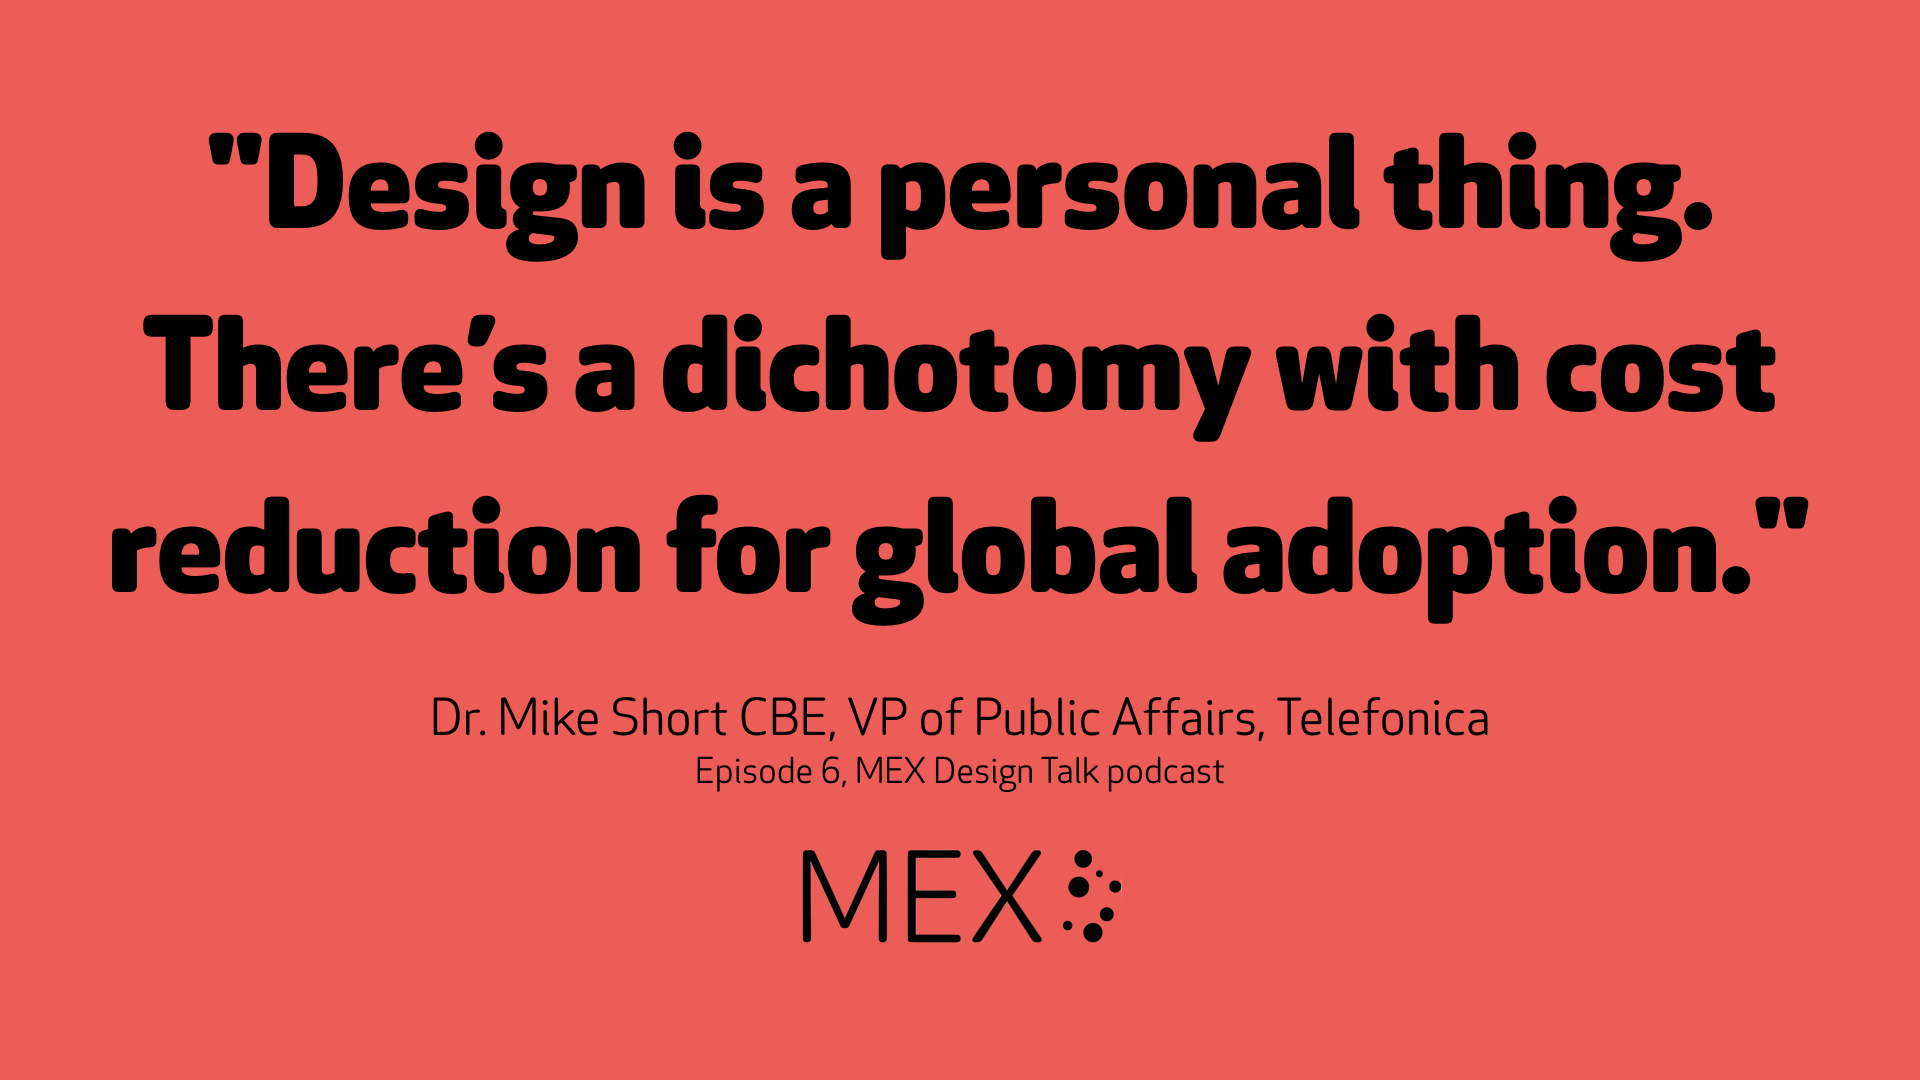 "Design is a personal thing. There’s a dichotomy with cost reduction for global adoption." Dr Mike Short CBE, VP of Public Affairs, Telefonica on the MEX Design Talk podcast